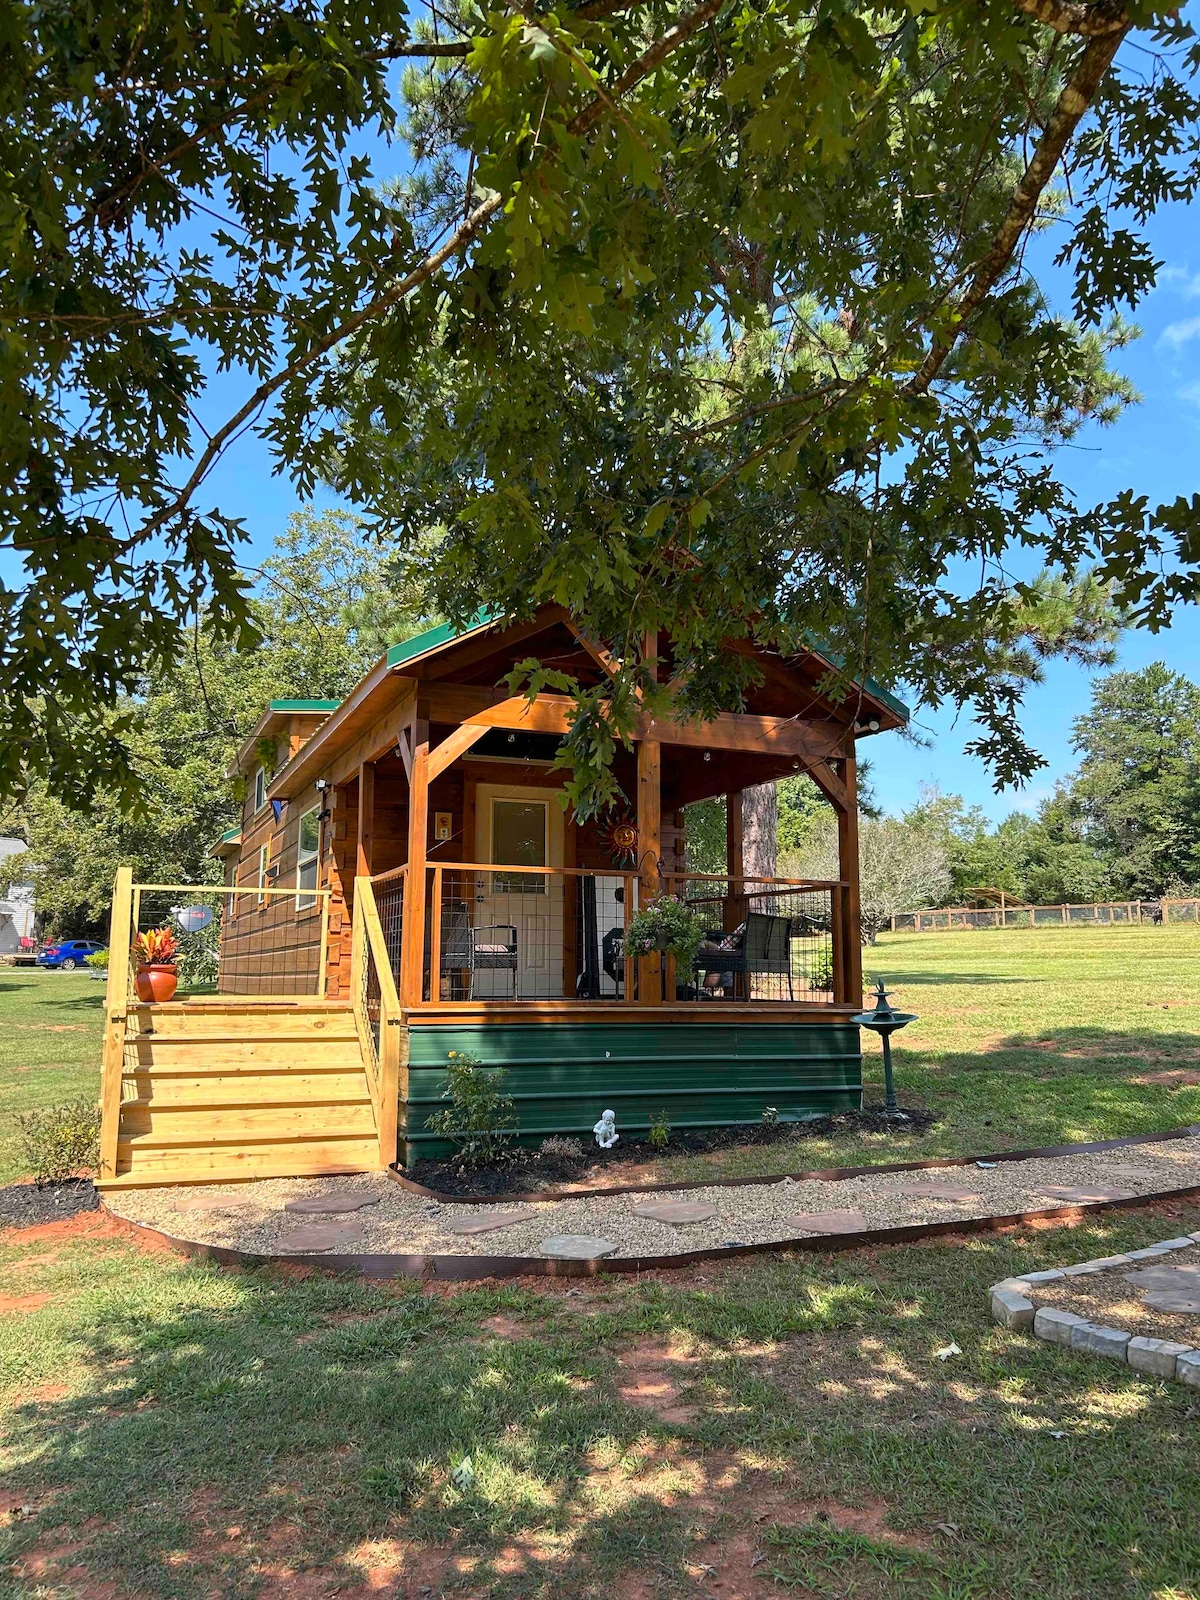 The Cabin at Firefly Cove